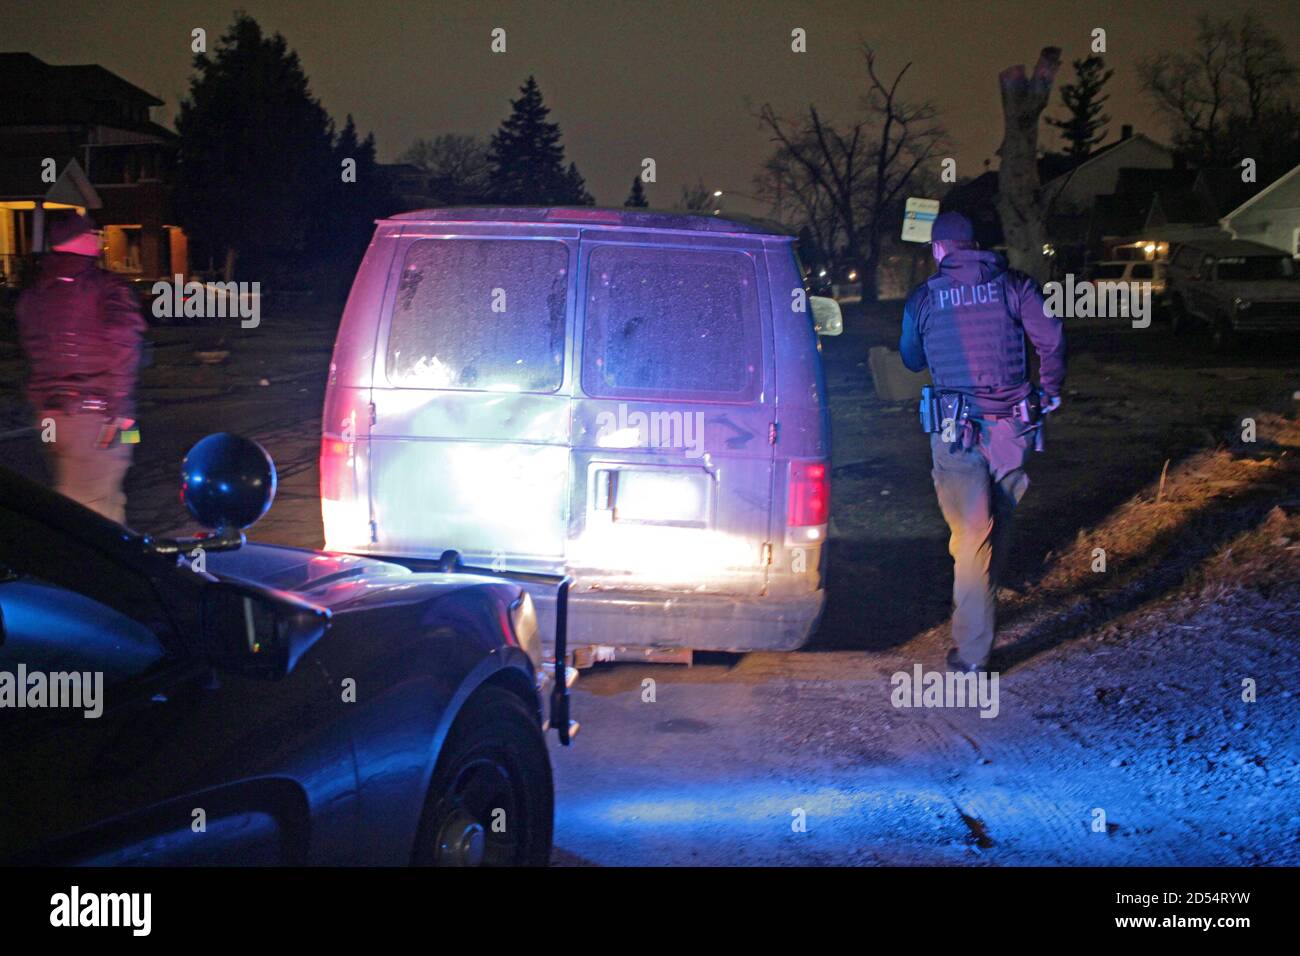 Detroit police officers appraoch the driver of a van at night, Detroit, Michigan, USA Stock Photo